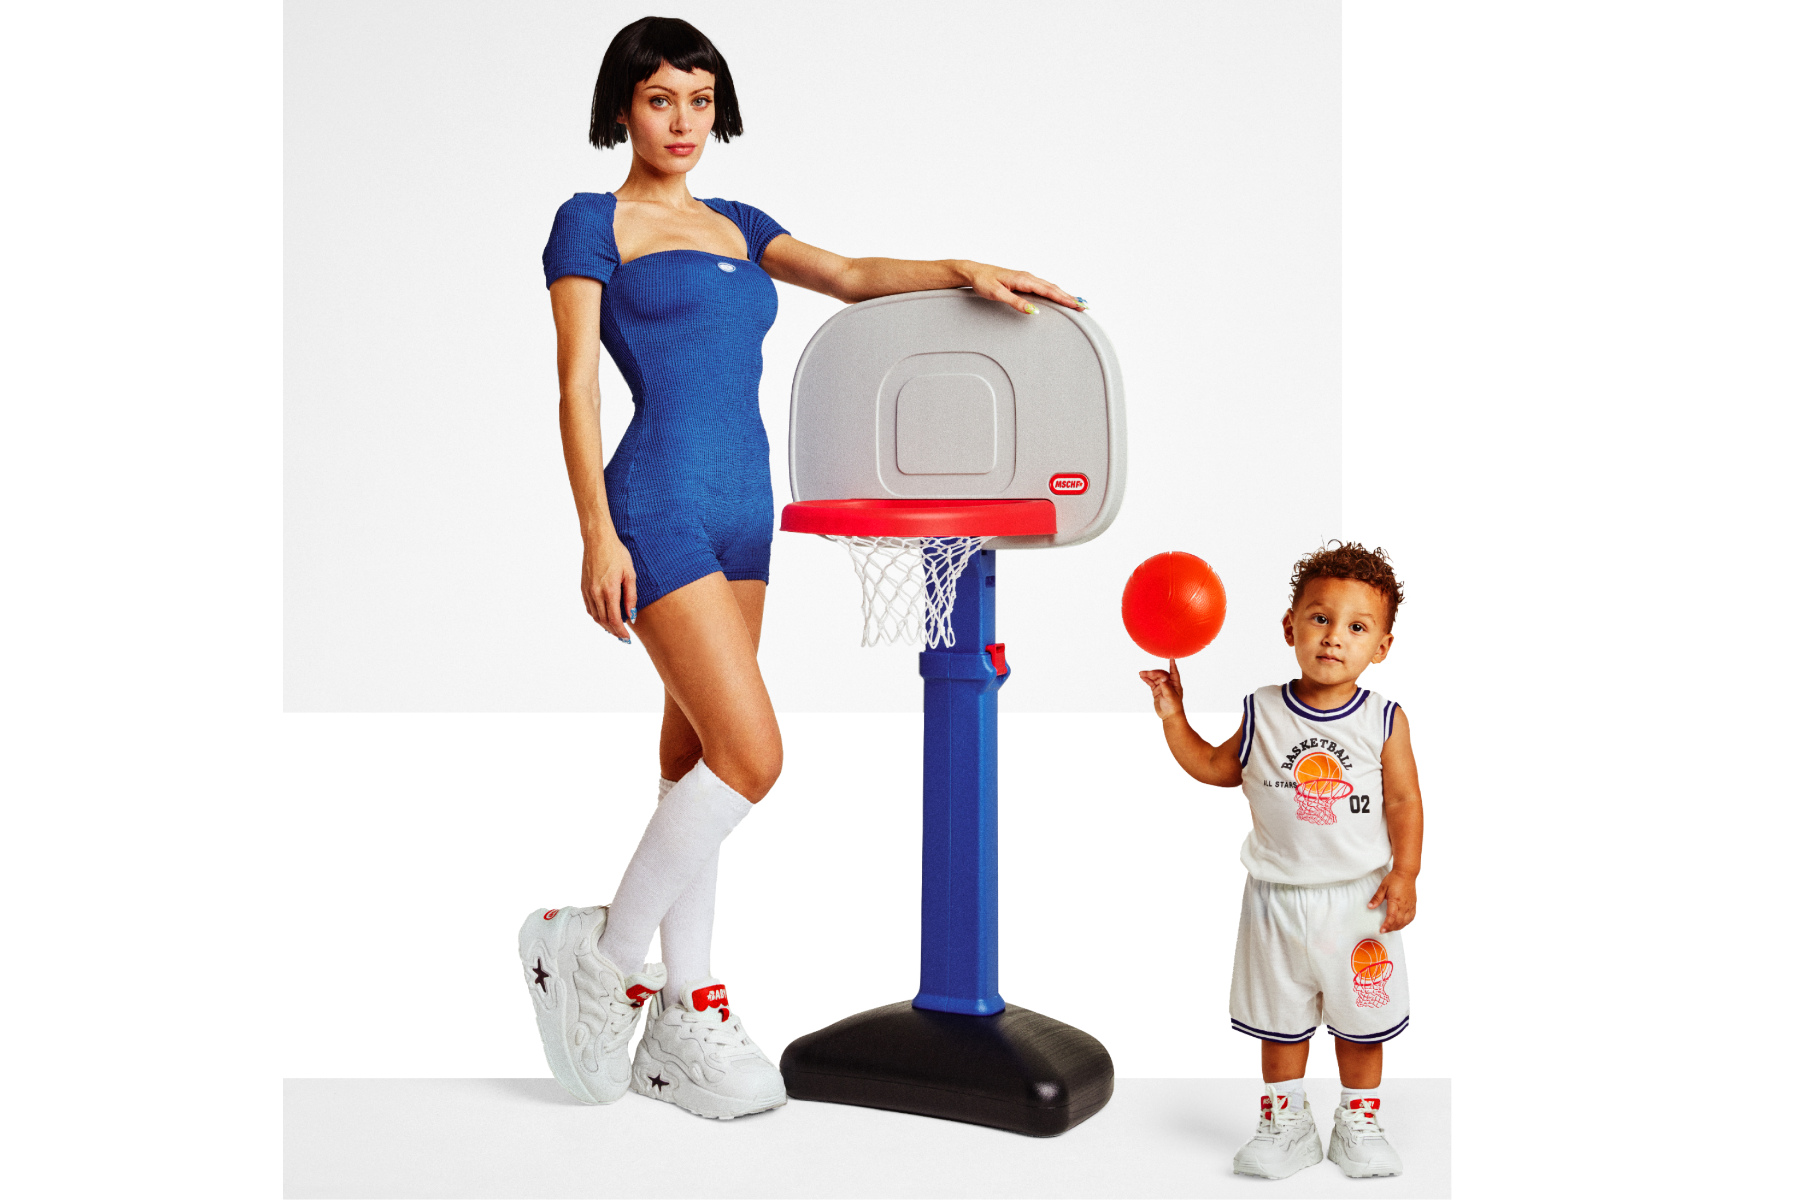 Lana Rhoades and her son, Milo, for MSCHF's Super Baby sneaker release.